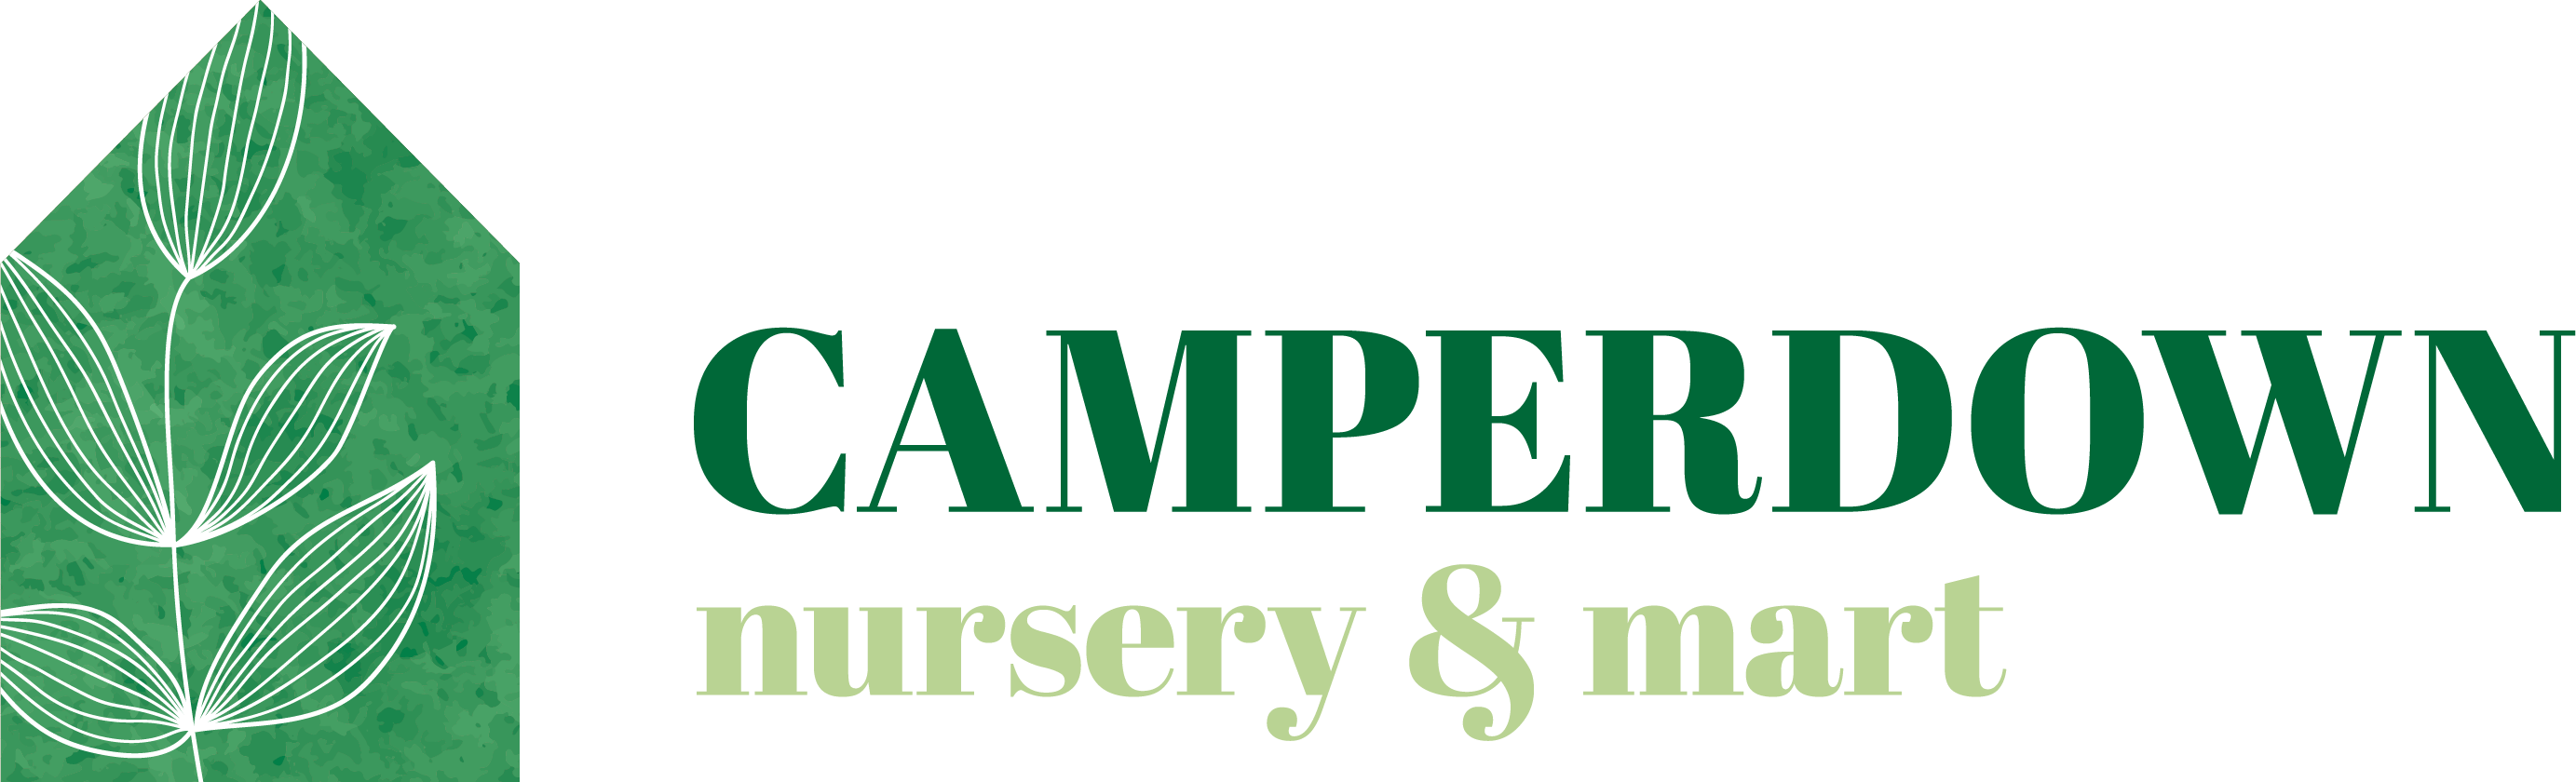 The Camperdown Nursery and Market